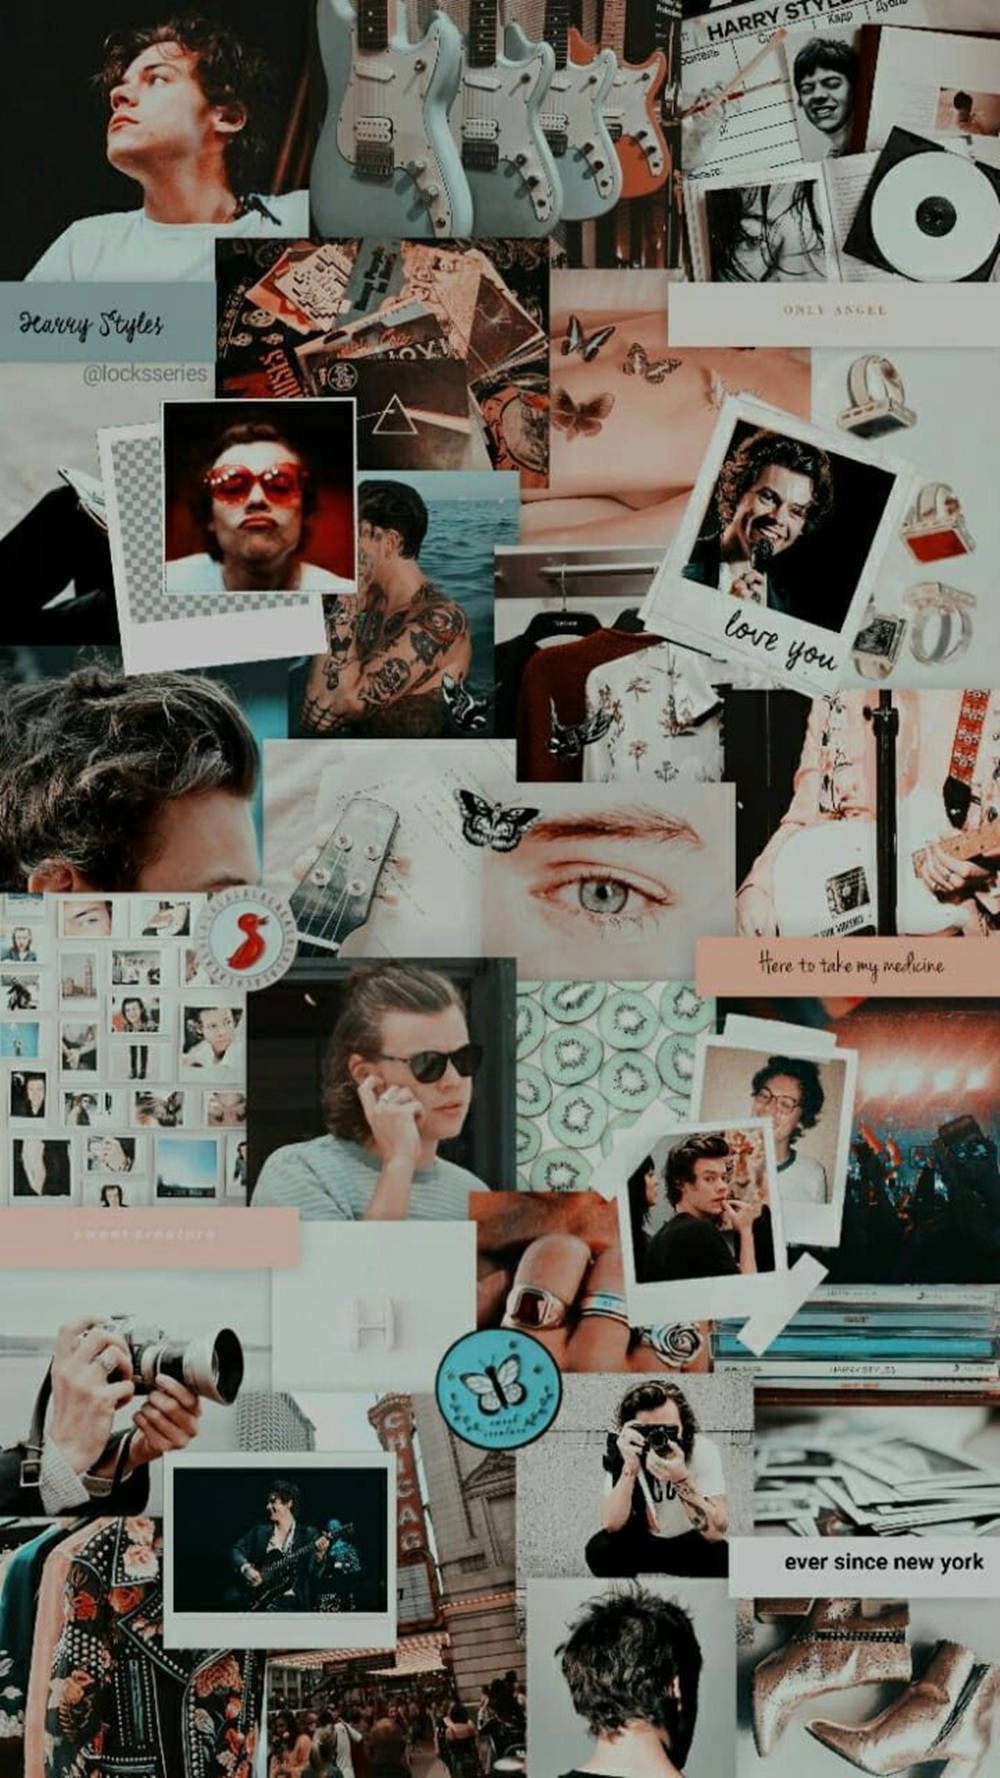 Harry Styles aesthetic wallpapers  Harry styles wallpaper Harry styles  lockscreen Harry styles